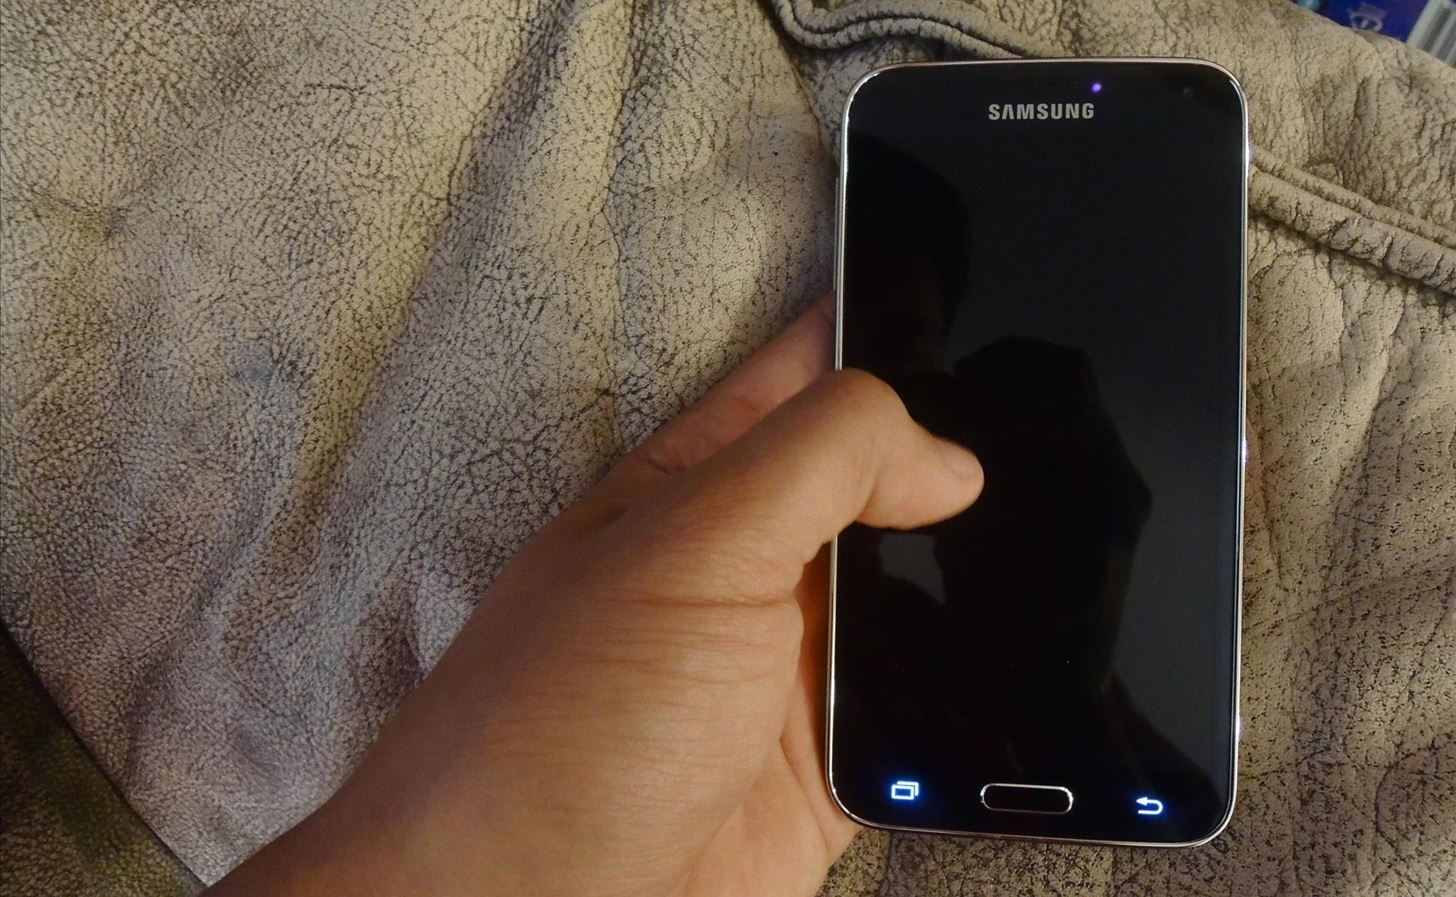 How to Control Your Samsung Galaxy S5 Using Gestures When the Screen Is Off